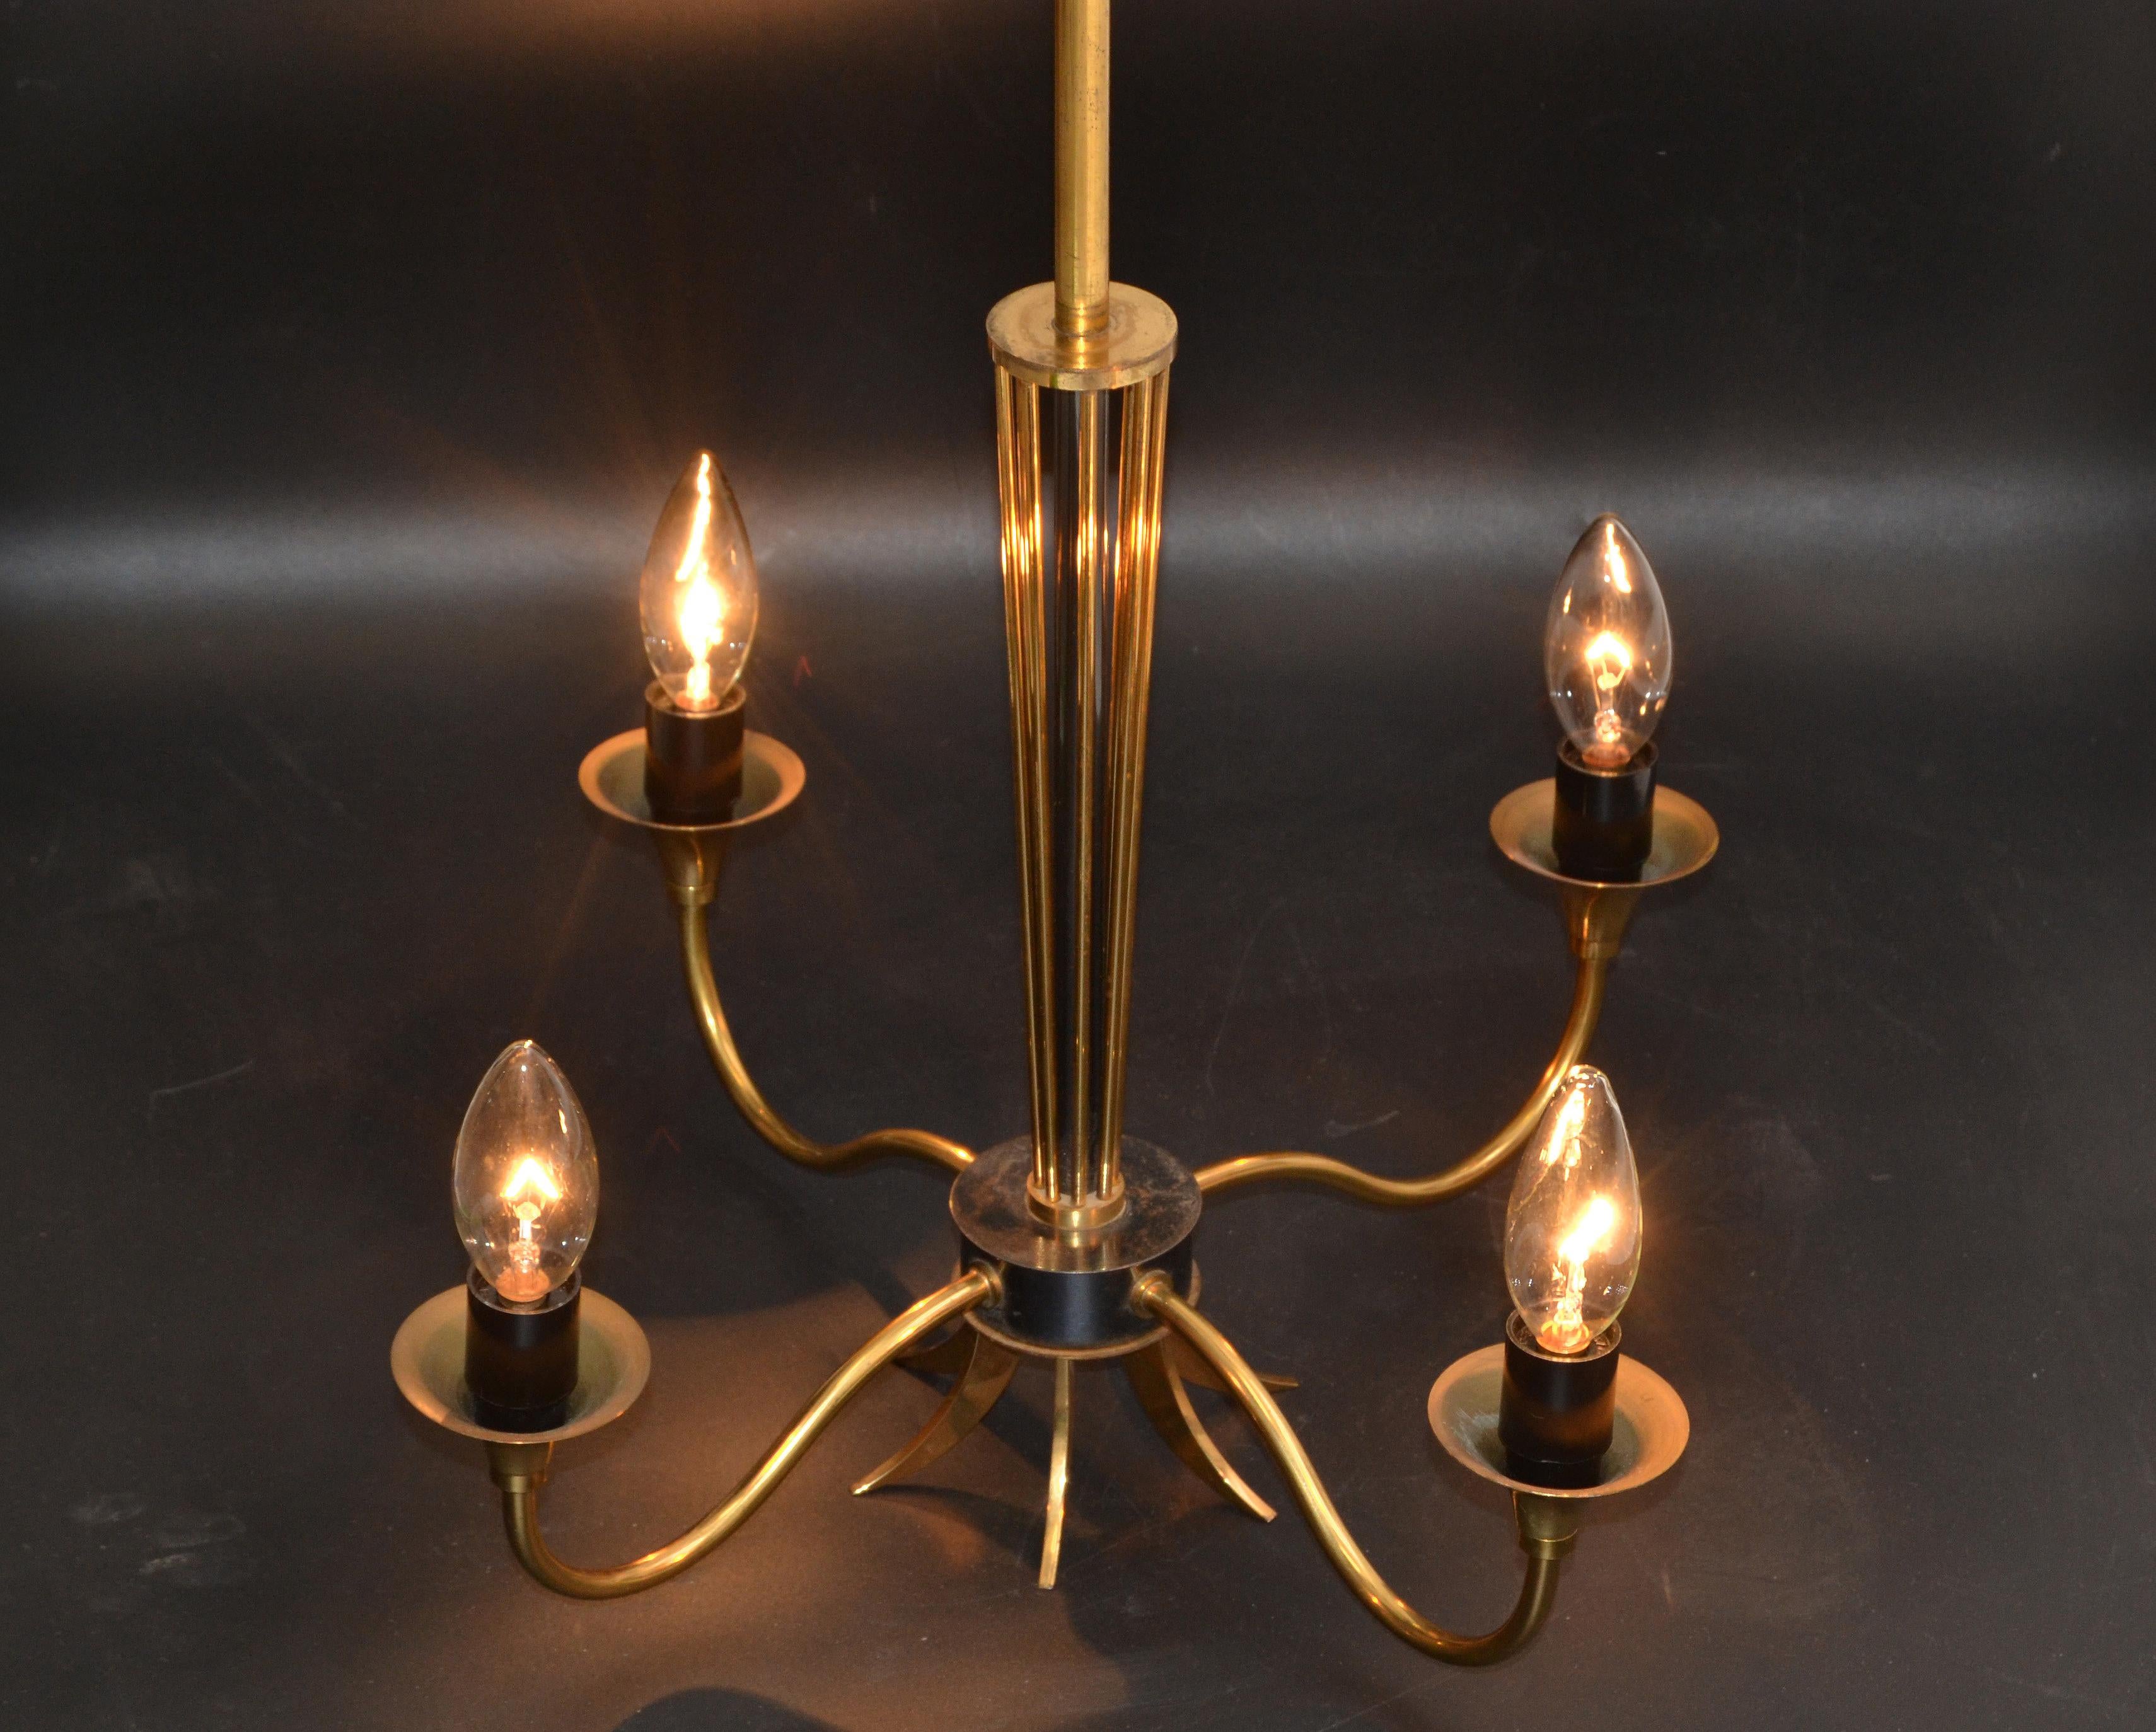 Maison Lunel Four-Light Chandelier Brass and Gun Metal French Mid-Century Modern For Sale 4